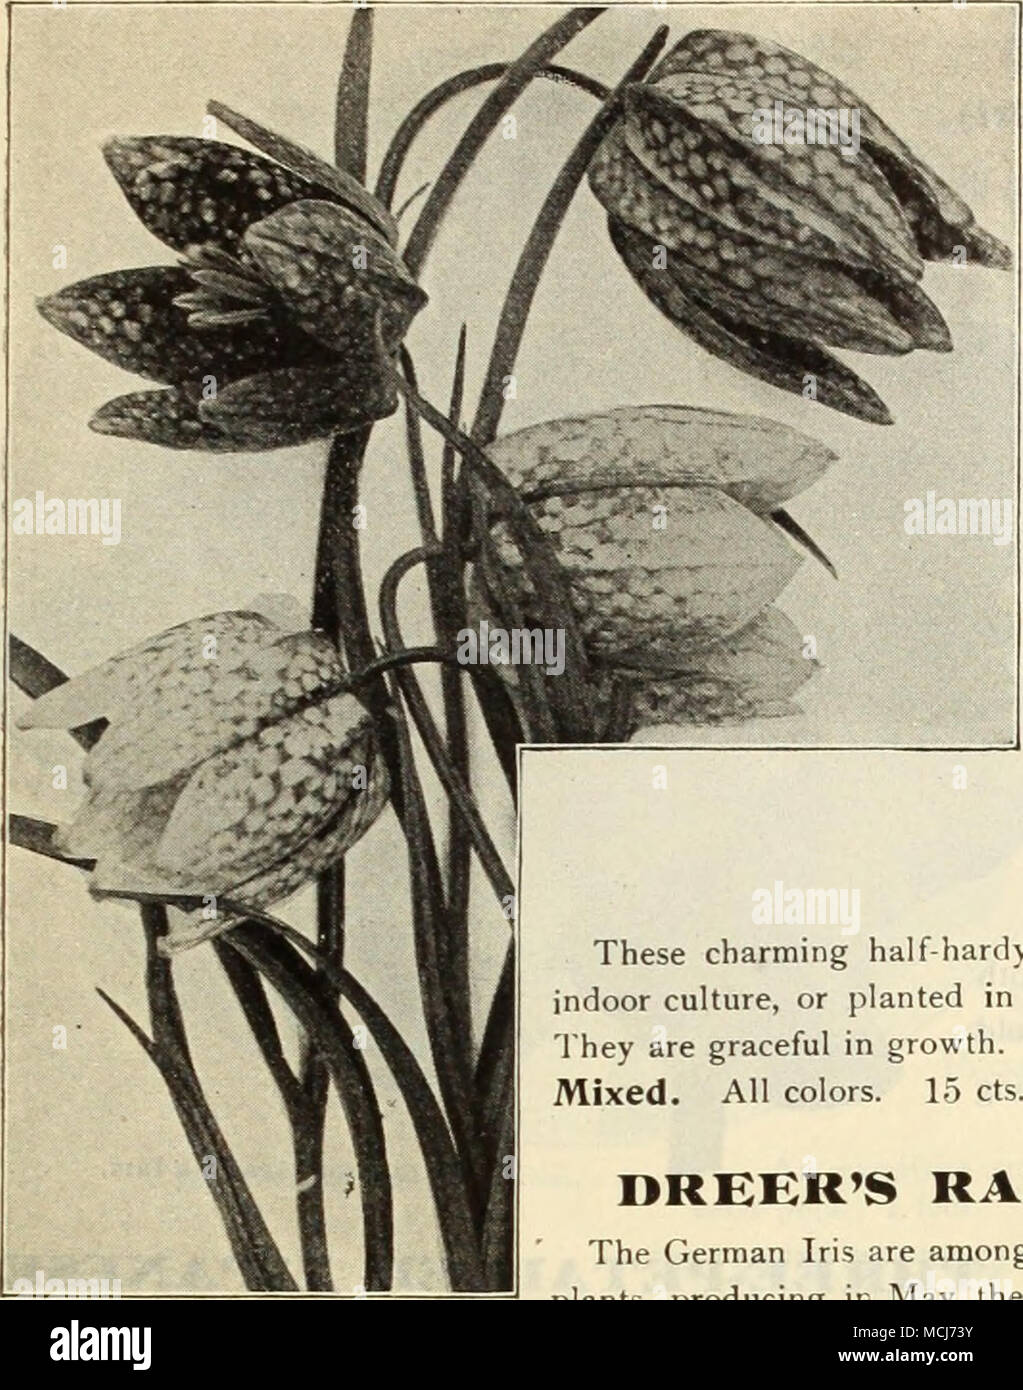 . Friiili.aria Meleagris. (Offered on Opposite Page.) HELLEBORVS. (Christmas Rose'. Most valuable hardy plants on account of yielding, at a season when flowers are scarce, their beautiful large blossoms. They succeed in any ordinary garden soil, but prefer a sheltered, semi-shaded situation. (Strong-flowering clumps ready in November.) 35 cts. each; $3.50 per doz. IIKMEROCAIXIS DayLiiy). These fine old-fashioned hardy tuberous plants are offered with other Hardy Perennial Plants. See list beginning on page 35. INCARYILLEA The Hardy Gloxinia). (Ready in October.) Delavayi. A hardy tuberous-root Stock Photo